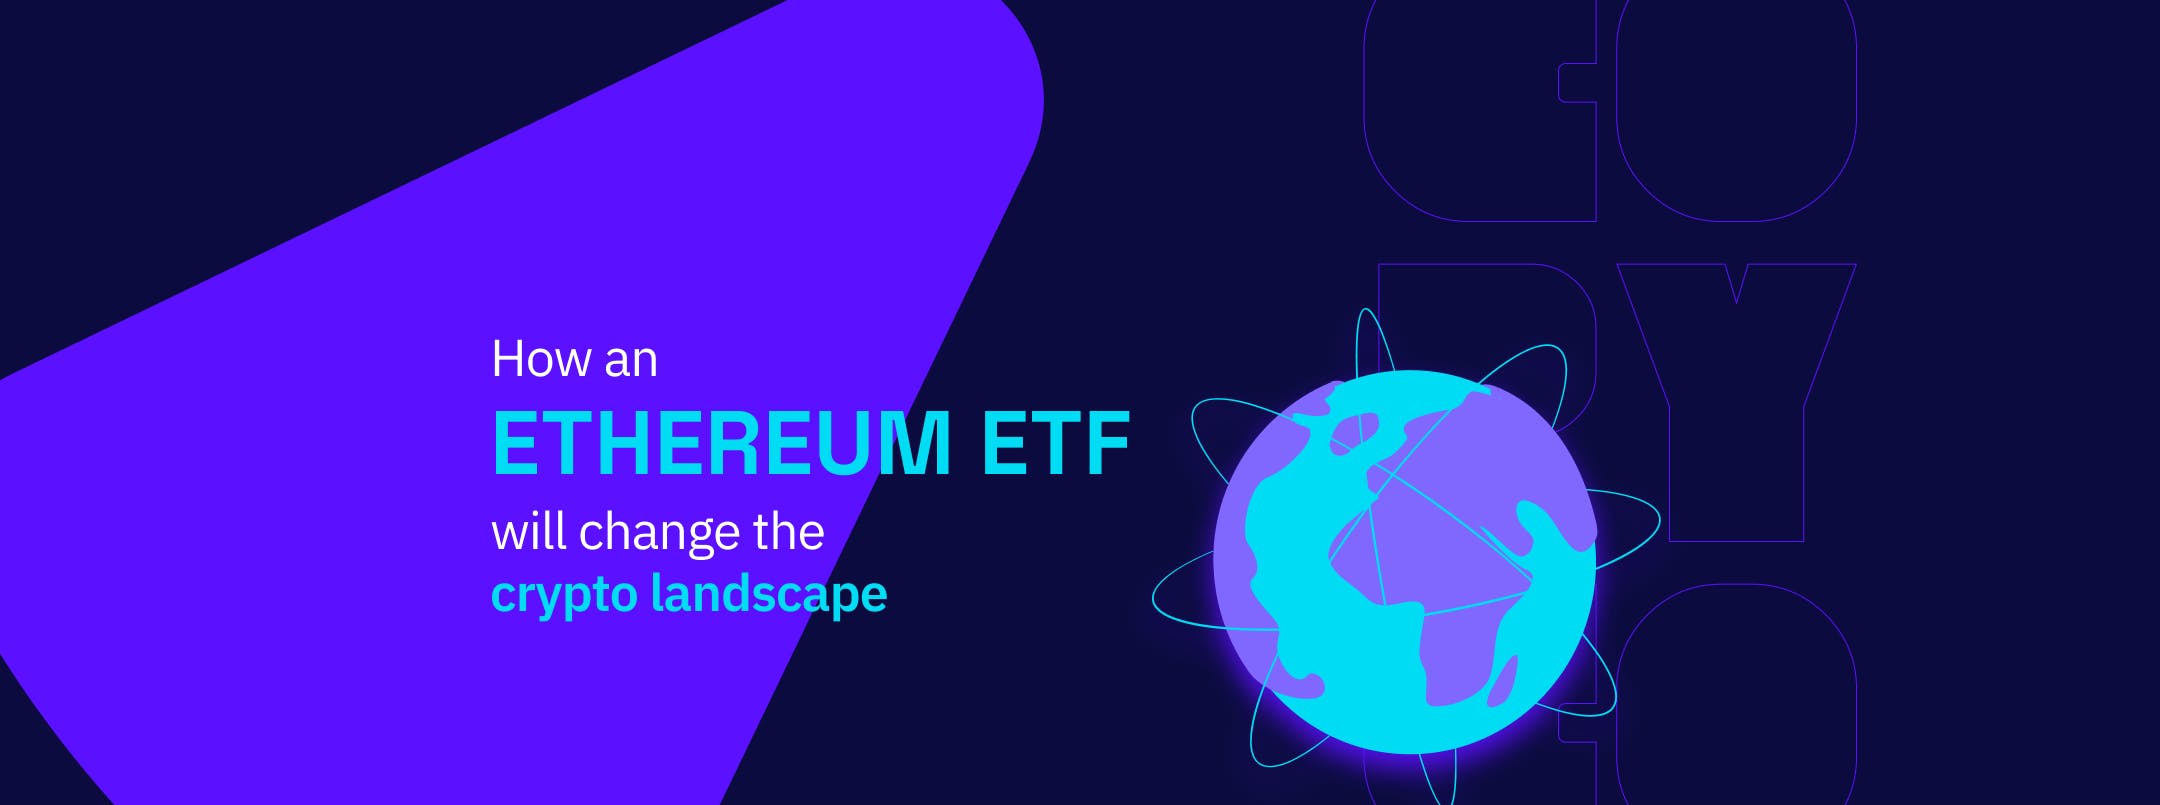 How Ethereum ETFs Will Change the Crypto Landscape in the Next Decade